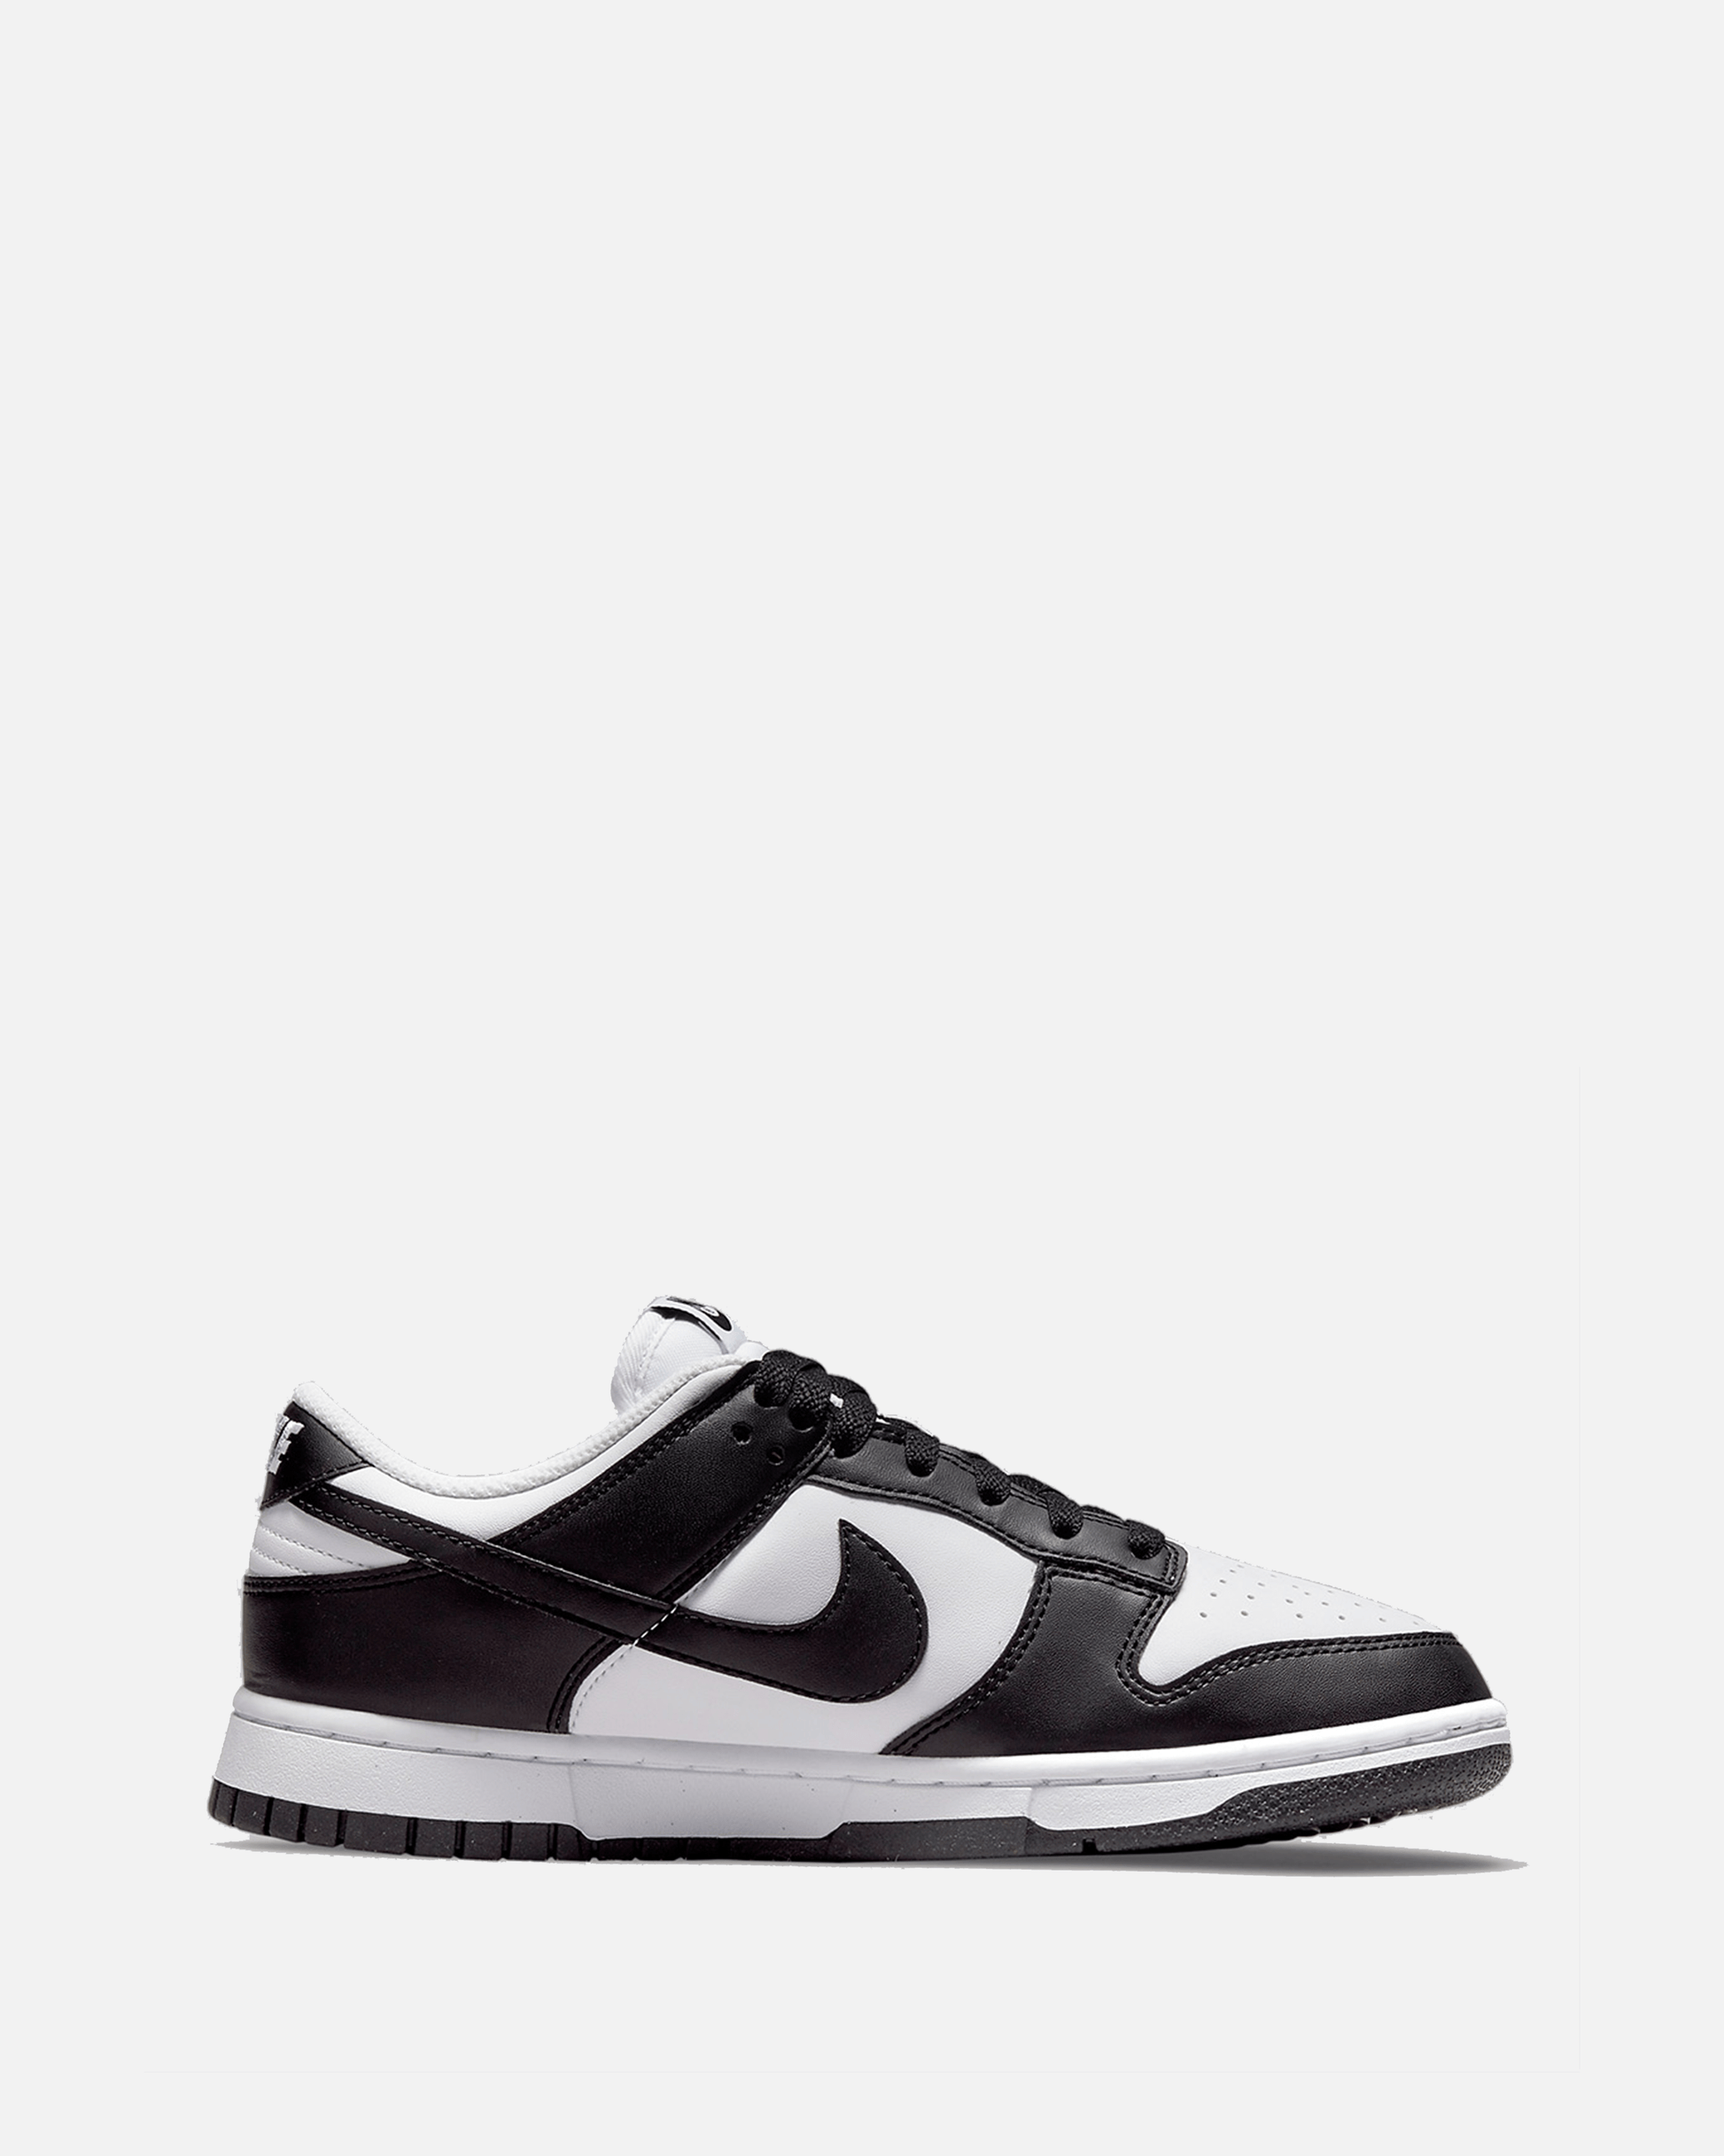 Nike Releases Women's Dunk Low 'Black & White'